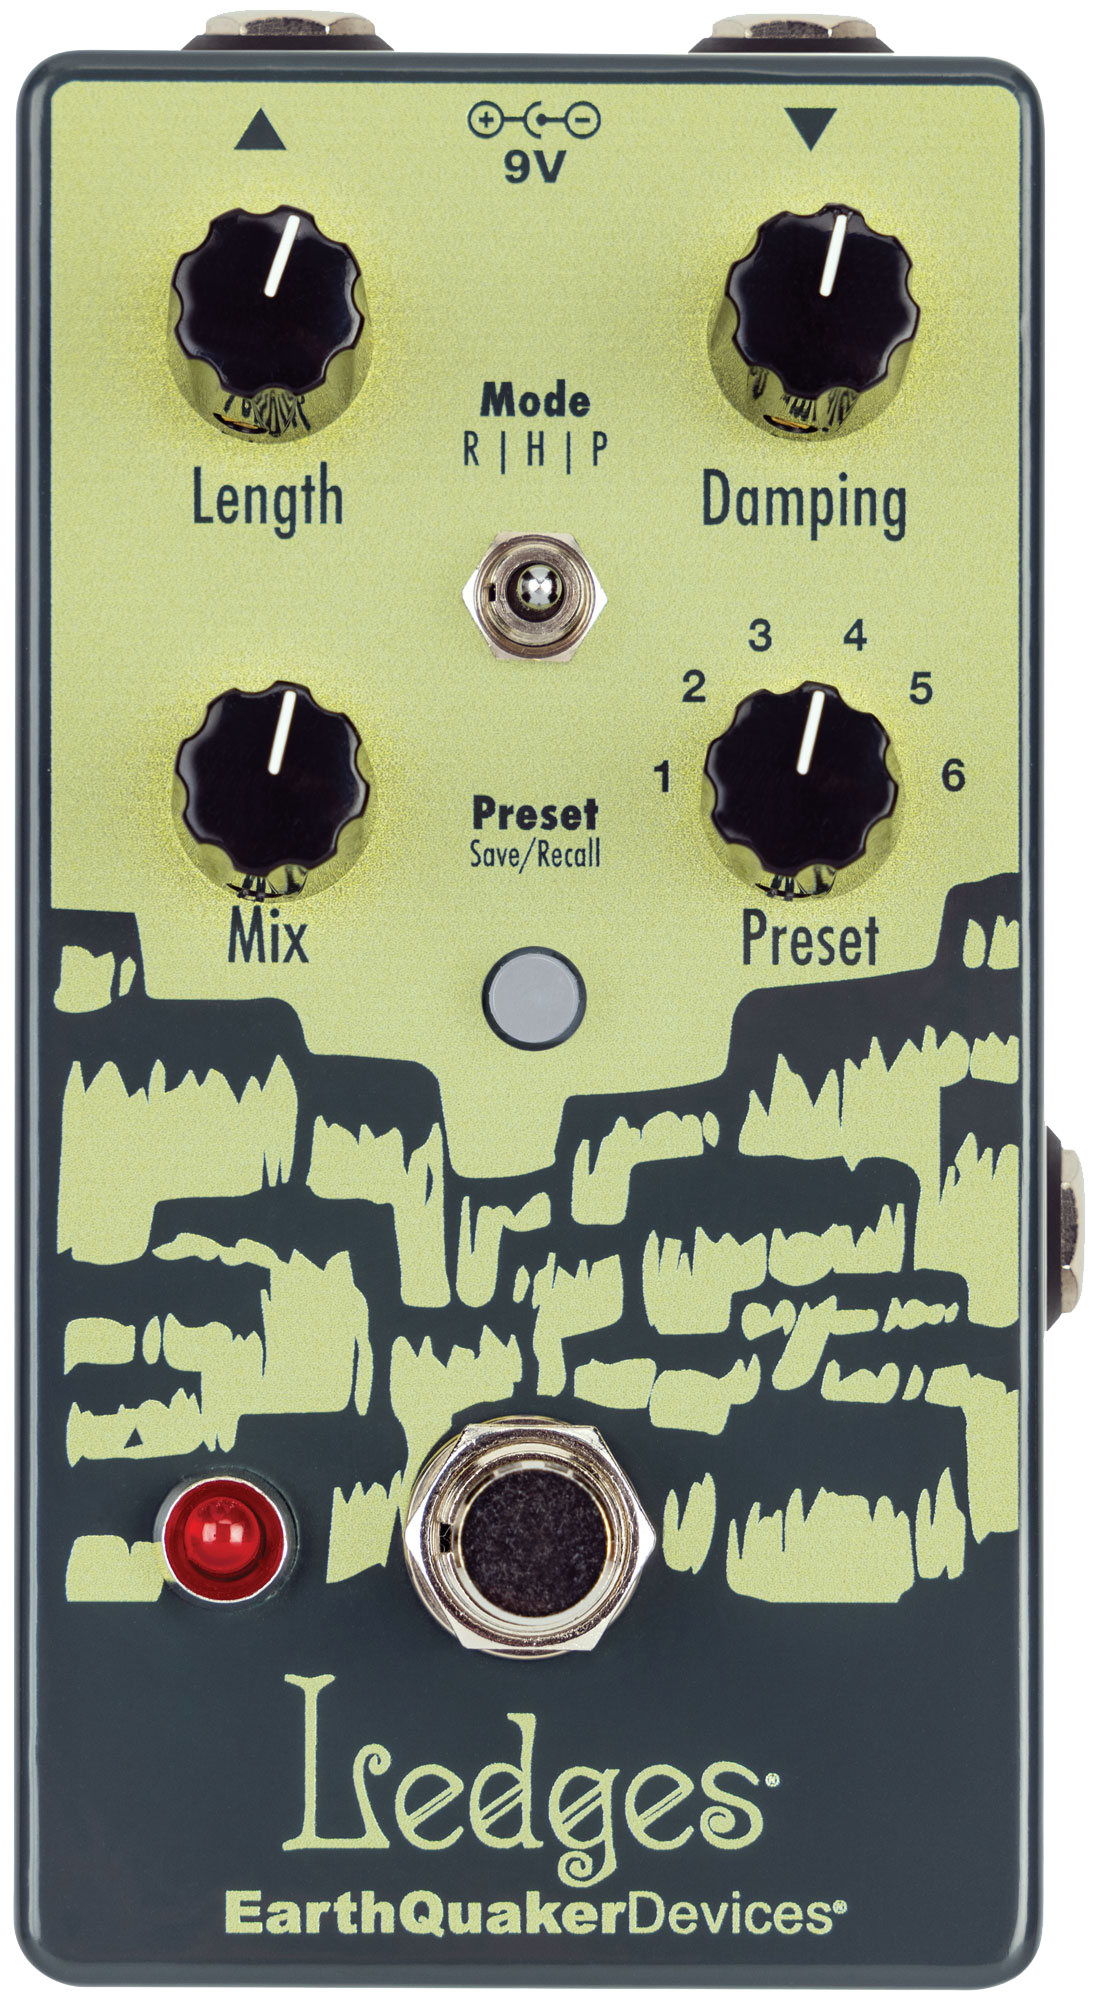 Top down of Earthquaker Devices Ledges Tri-Dimensional Reverberation Machine.